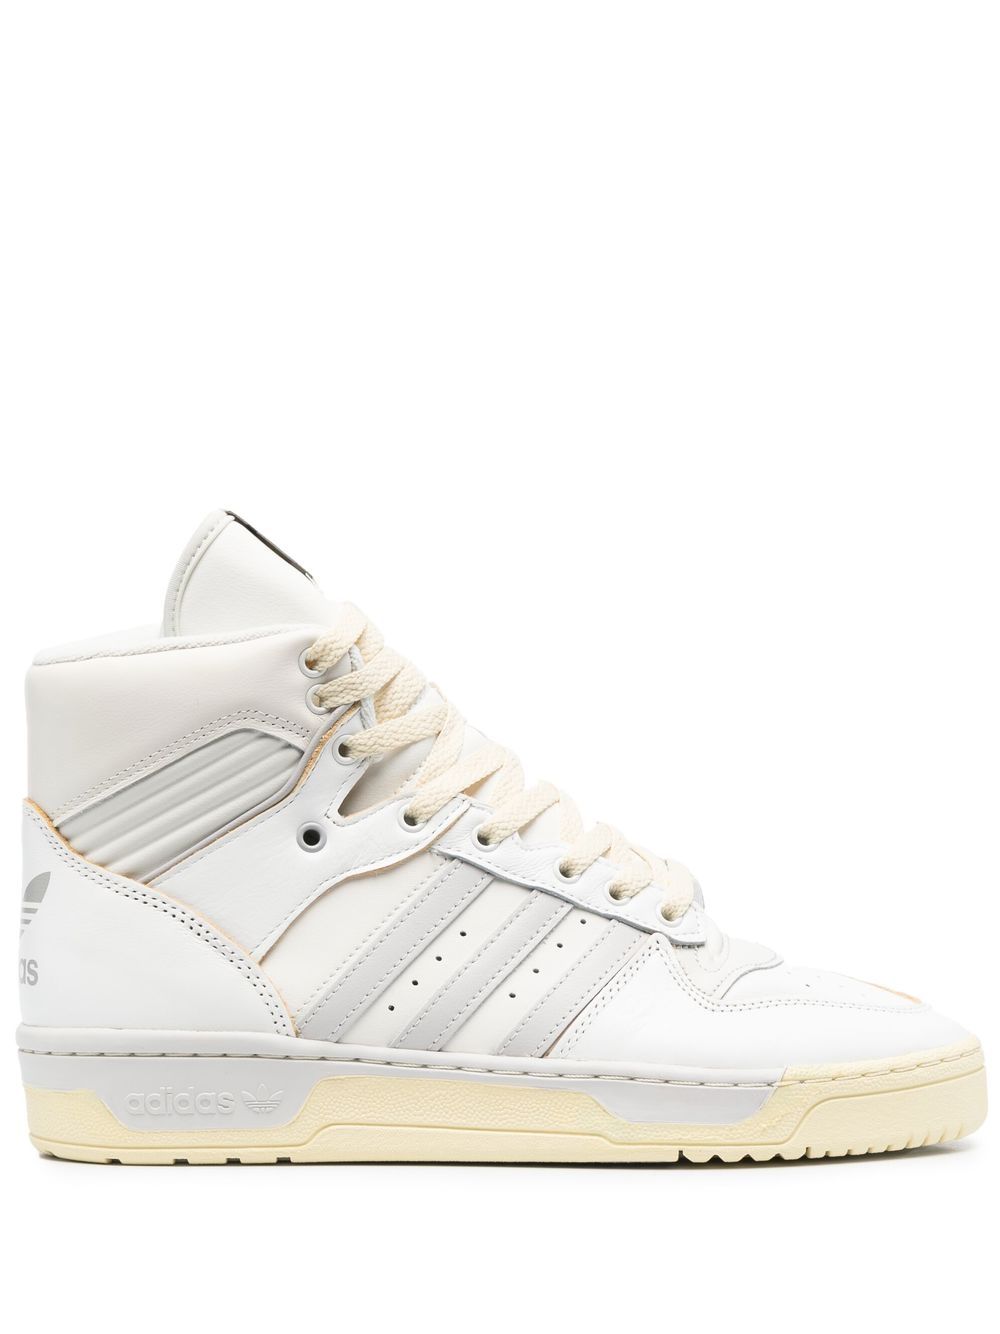 platform moden pust White and grey Rivalry high-top sneakers - men - ADIDAS -  divincenzoboutique.com